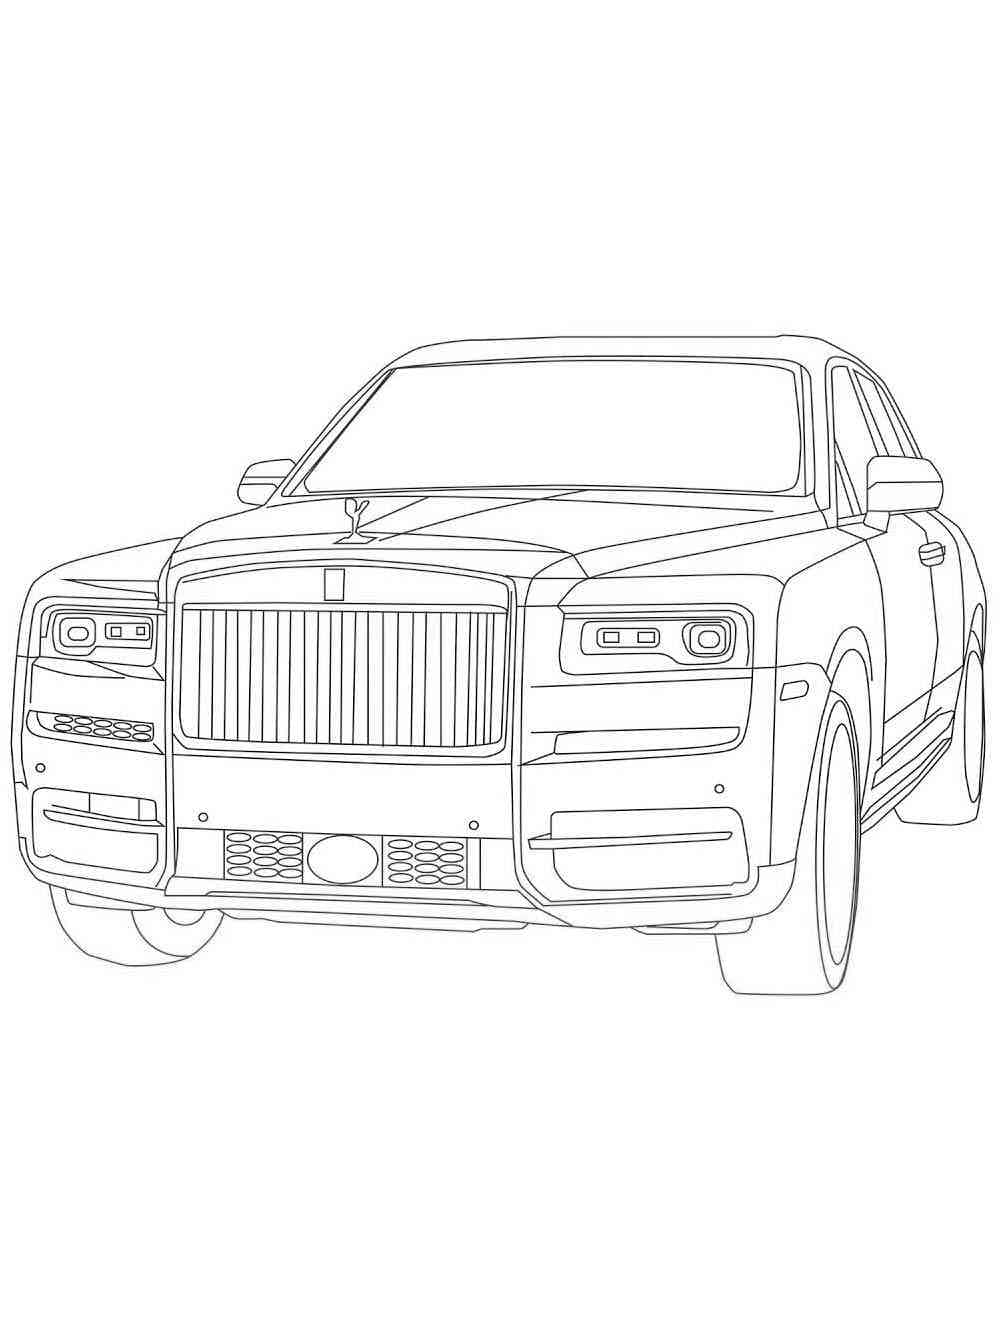 Rolls Royce Free coloring page - Download, Print or Color Online for Free